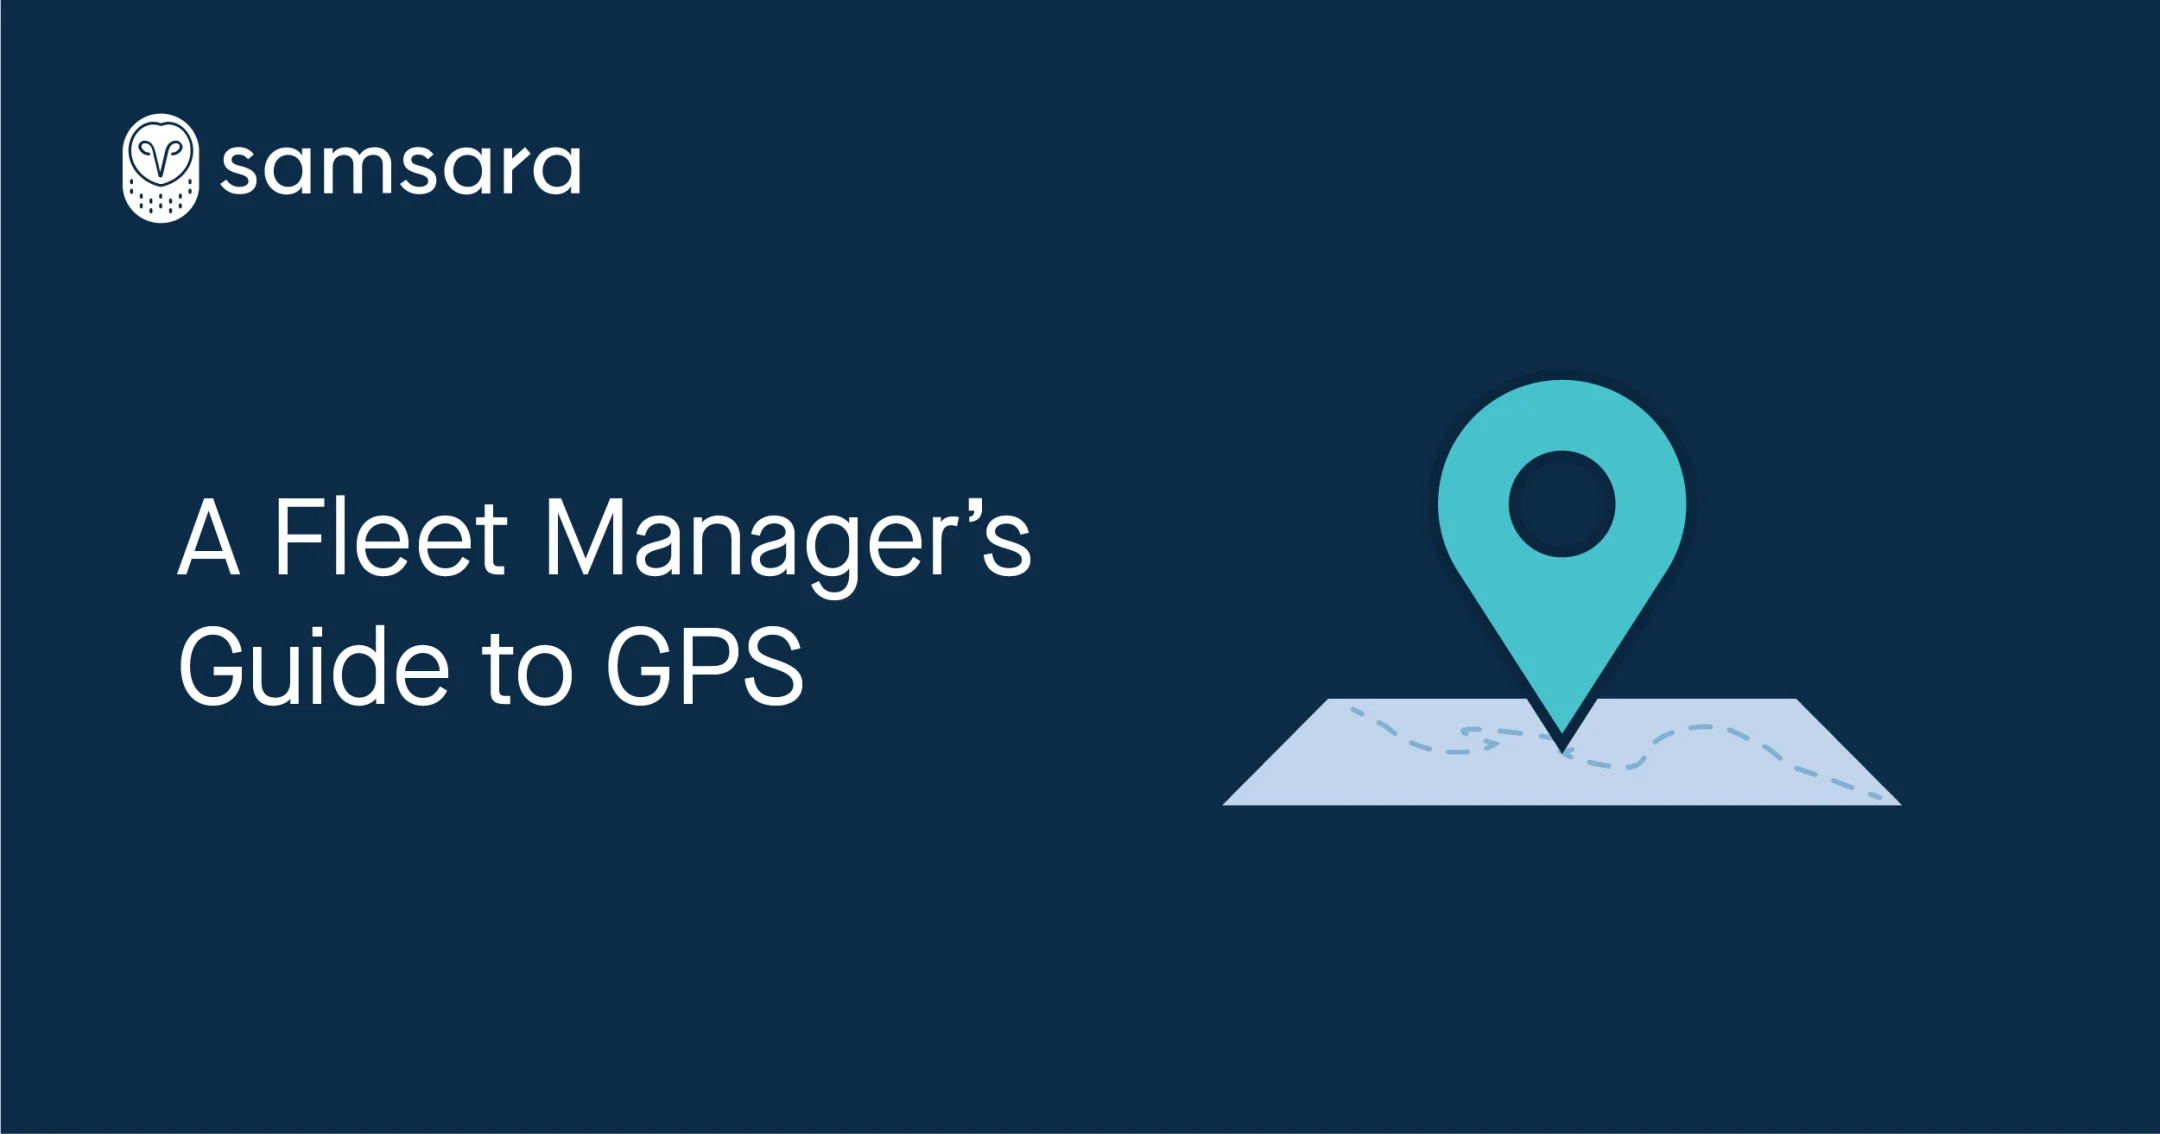 A Fleet Manager’s Guide to GPS